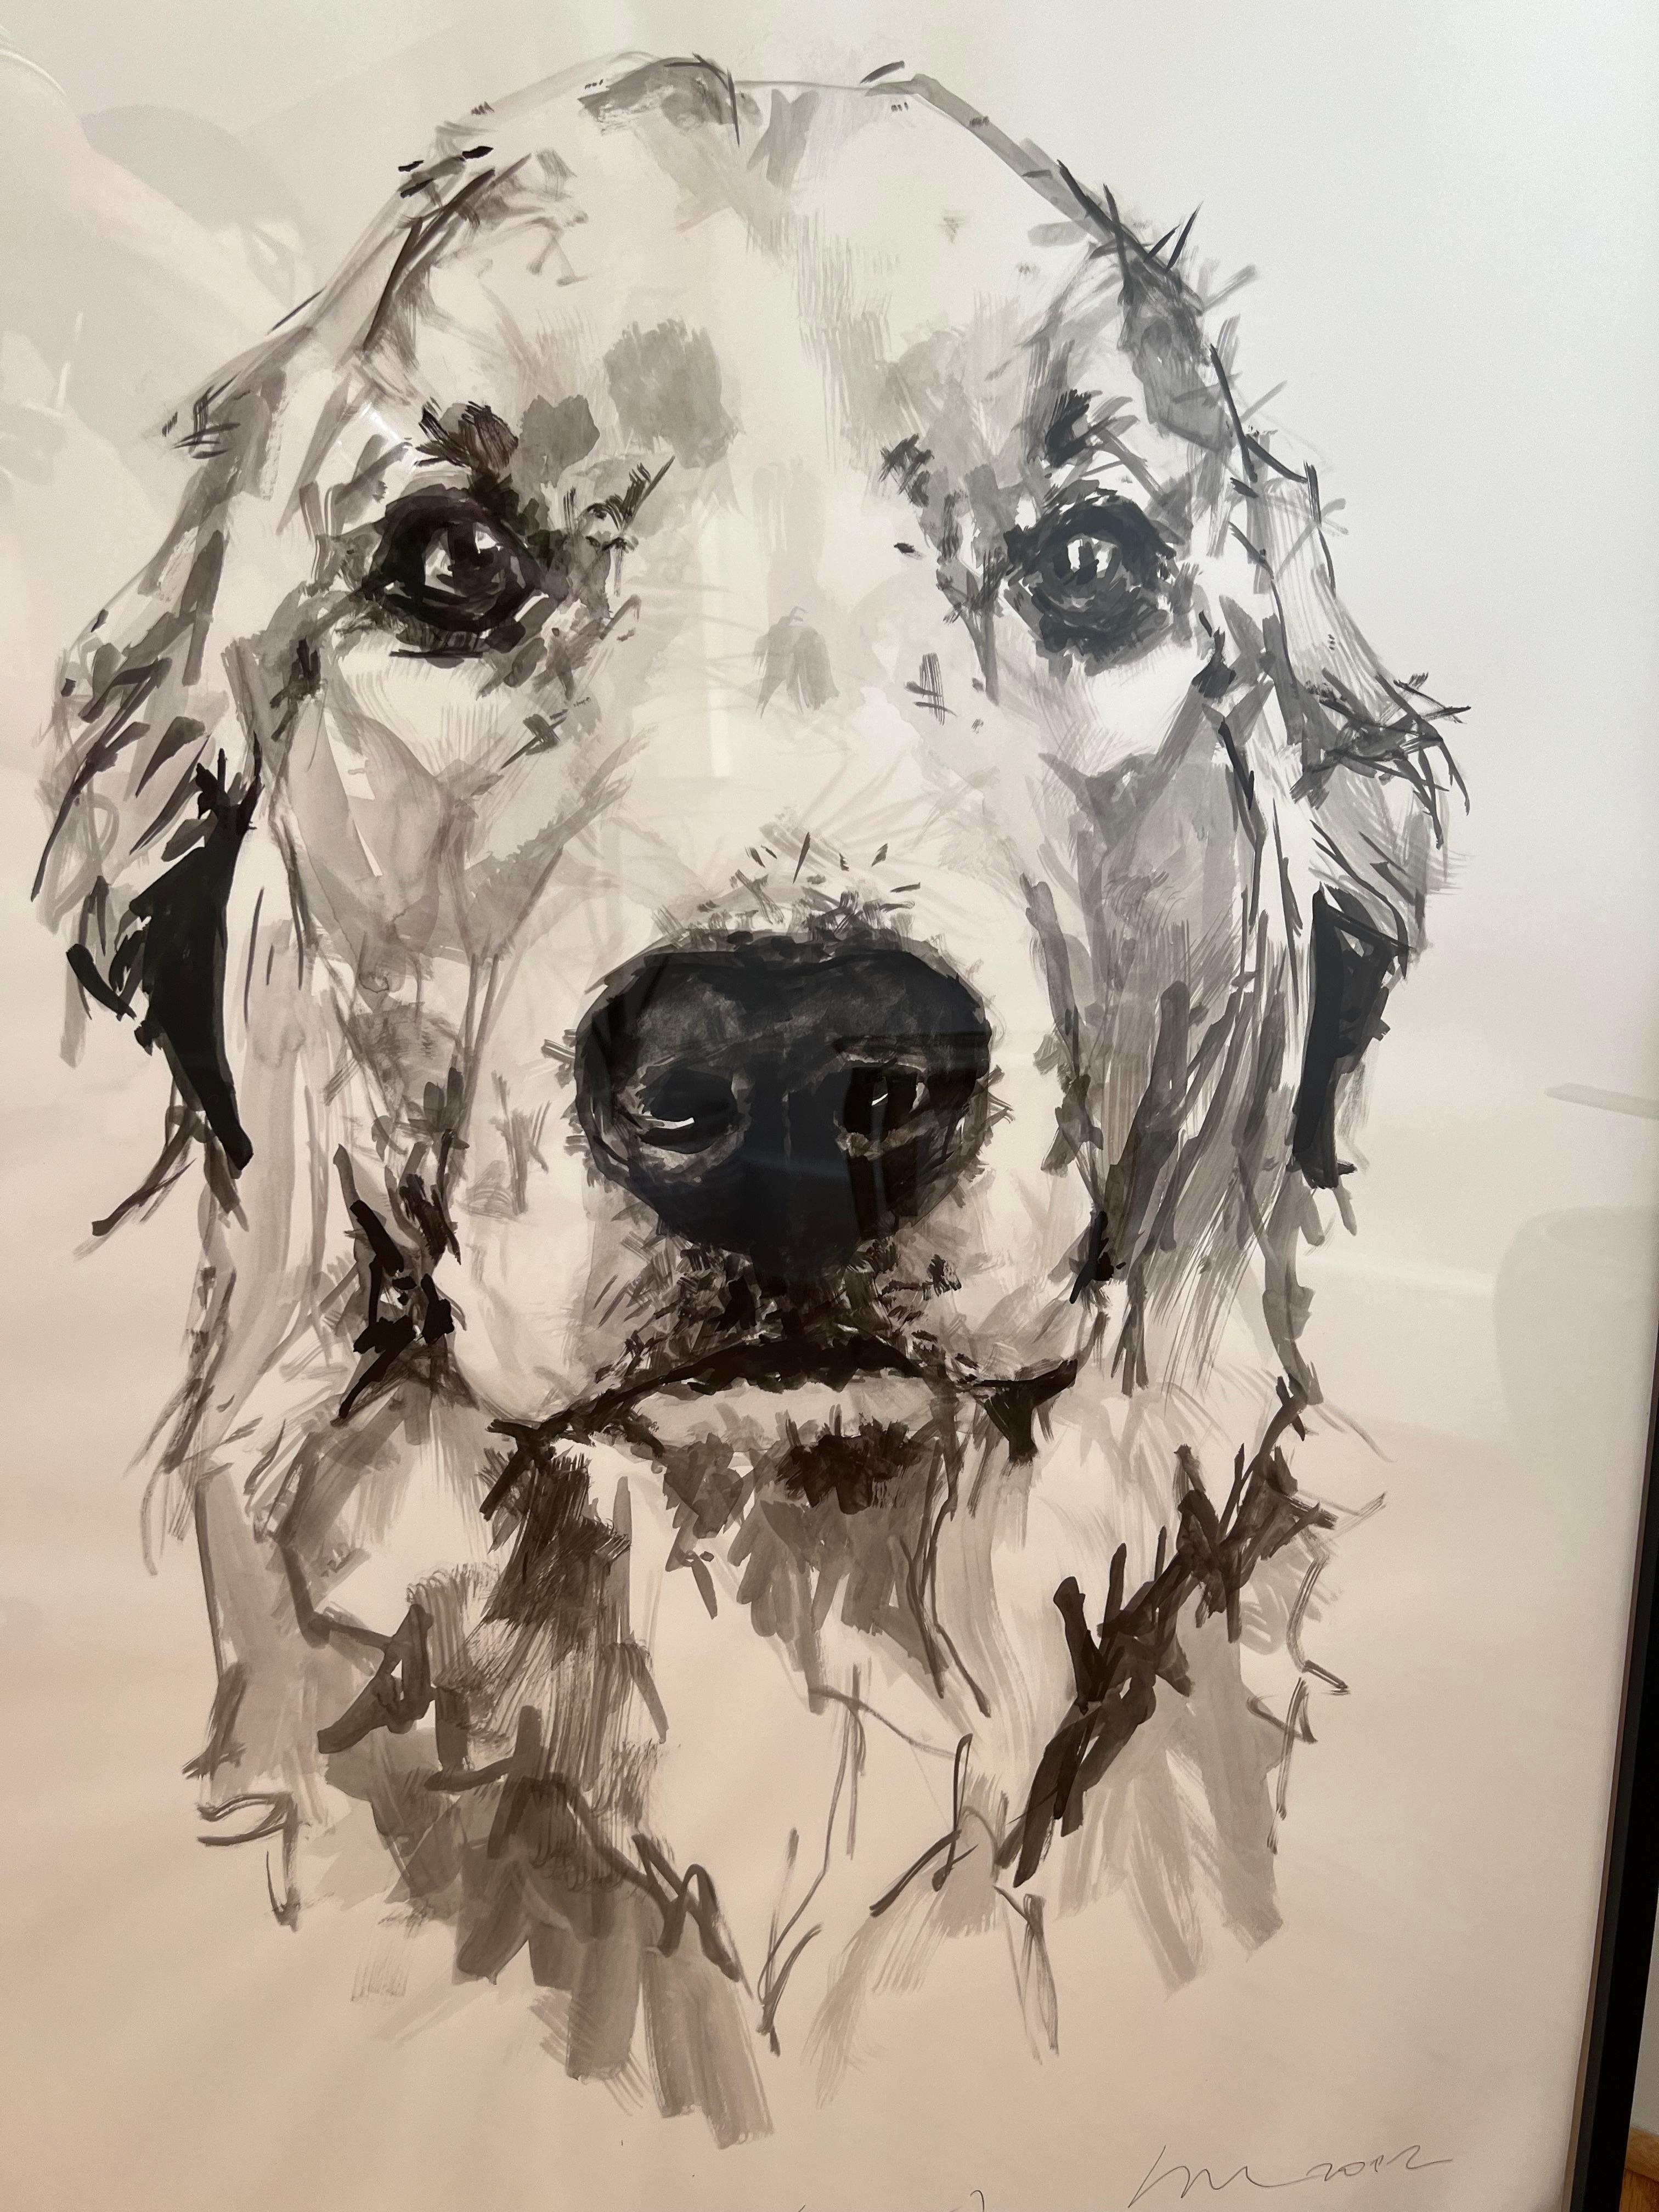 Golden Retriever 1, large contemporary minimal portrait in black ink on paper - Painting by Ian Mason